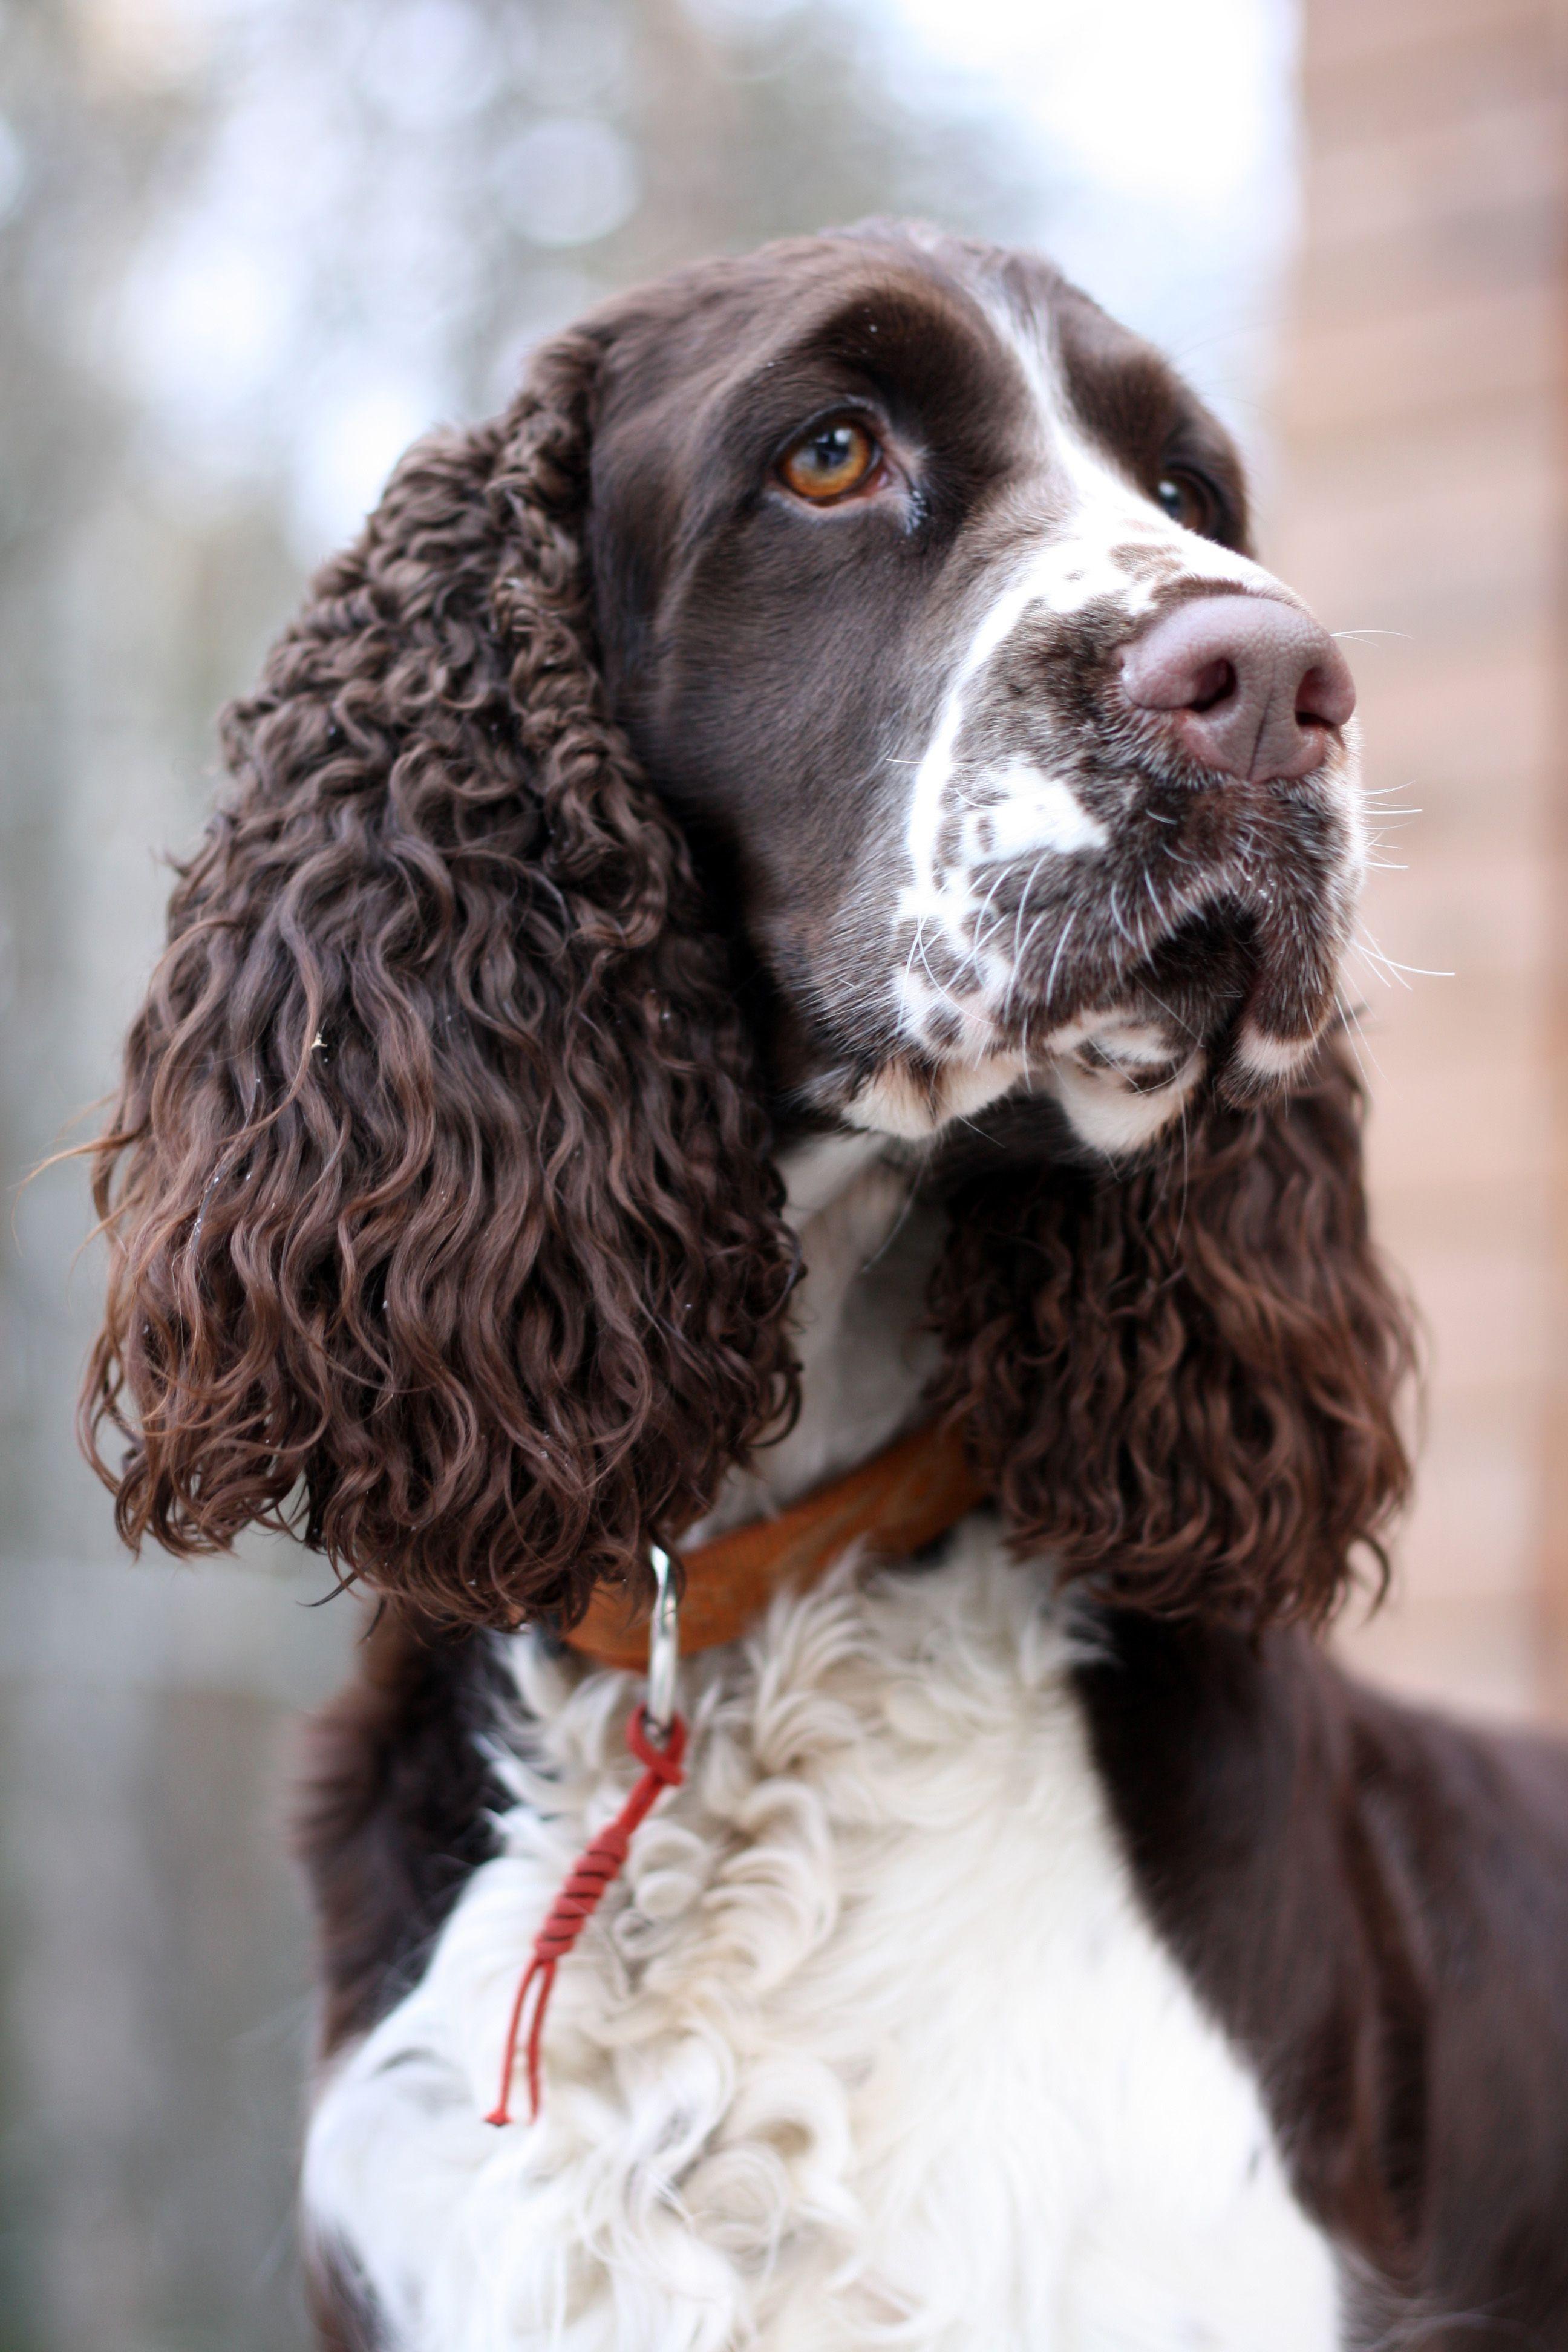 English Springer Spaniel photo and wallpaper. The beautiful